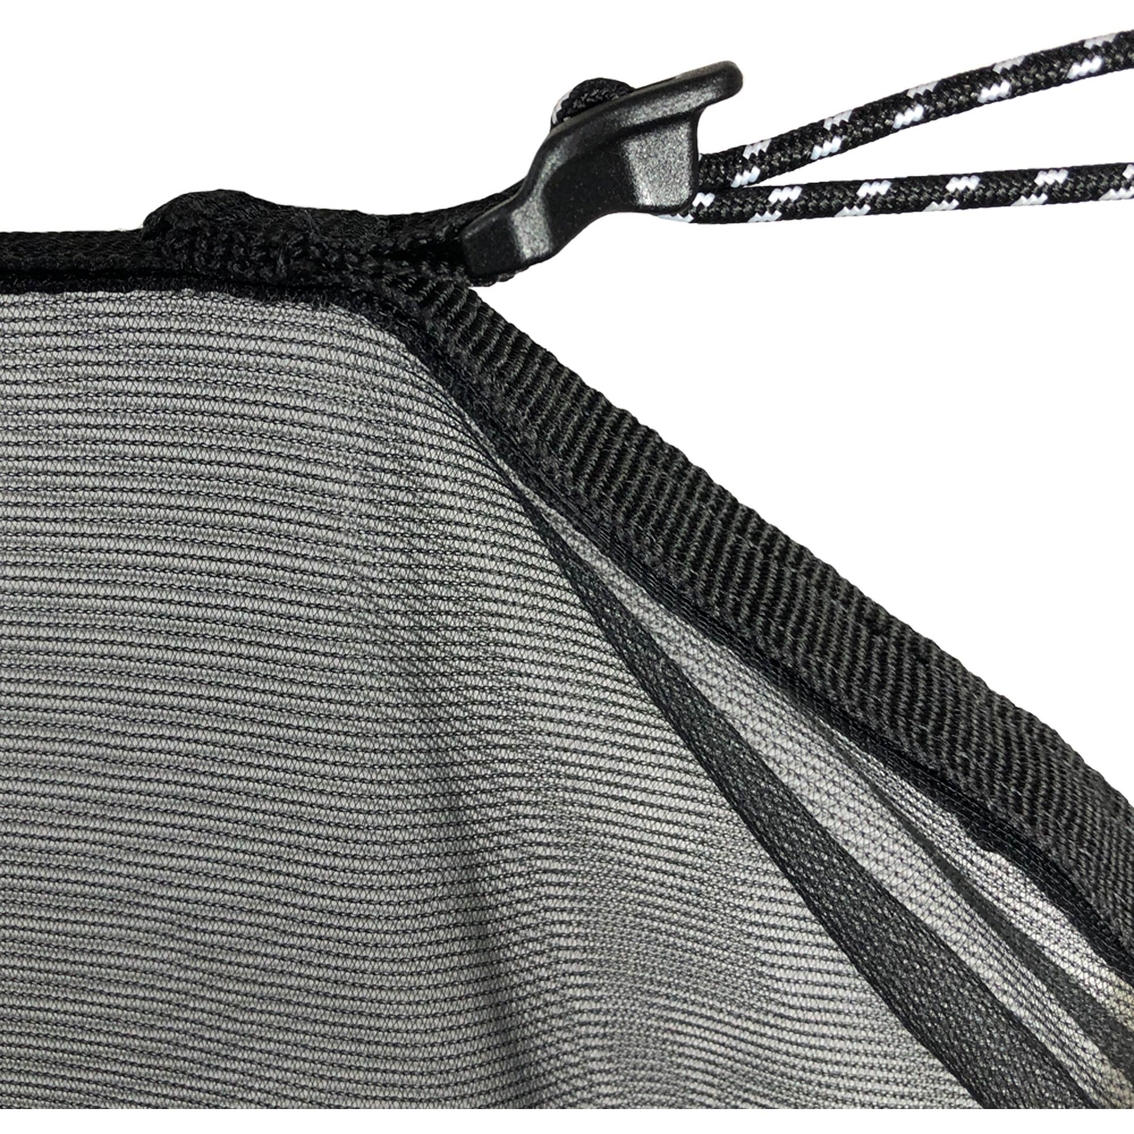 Grand Trunk Mozzy Lite Mosquito Bug Net - Image 2 of 10